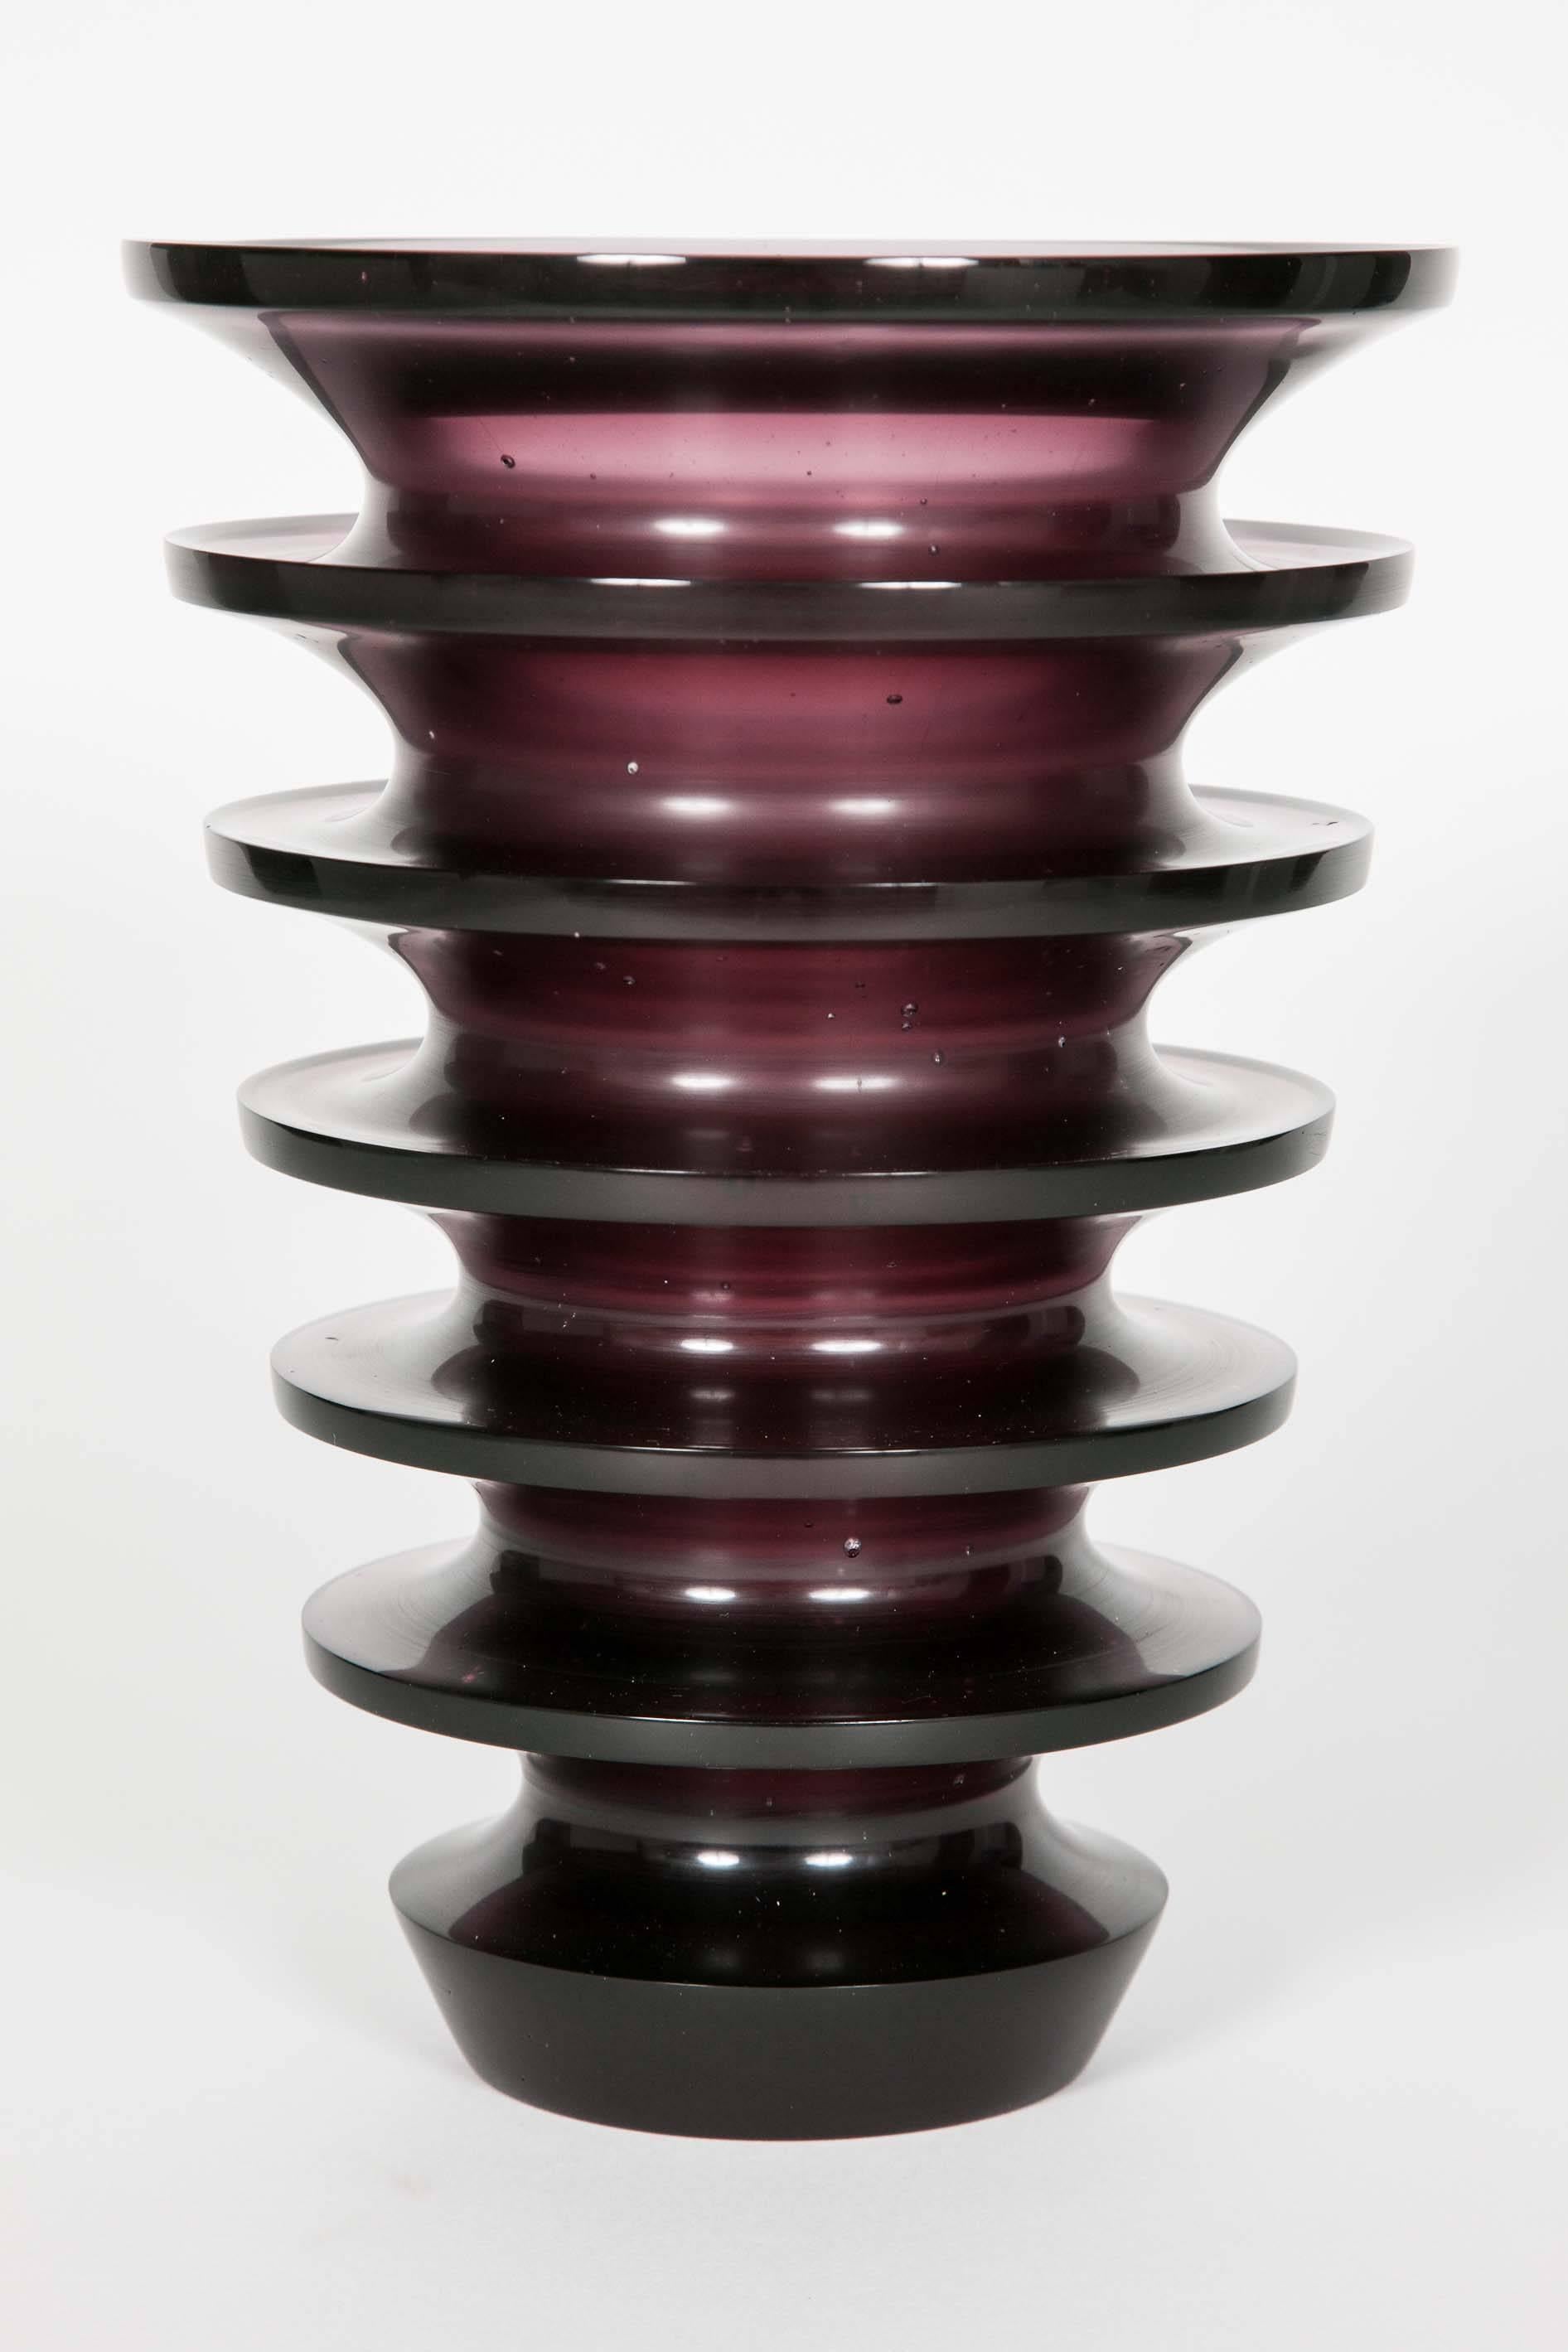 Leila is a cast glass artwork in a beautiful soft dark purple / blackberry colour by the British artist Paul Stopler. With a ridged exterior and smooth interior, the form is first turned in wax from which this is cast.

Using a complex series of